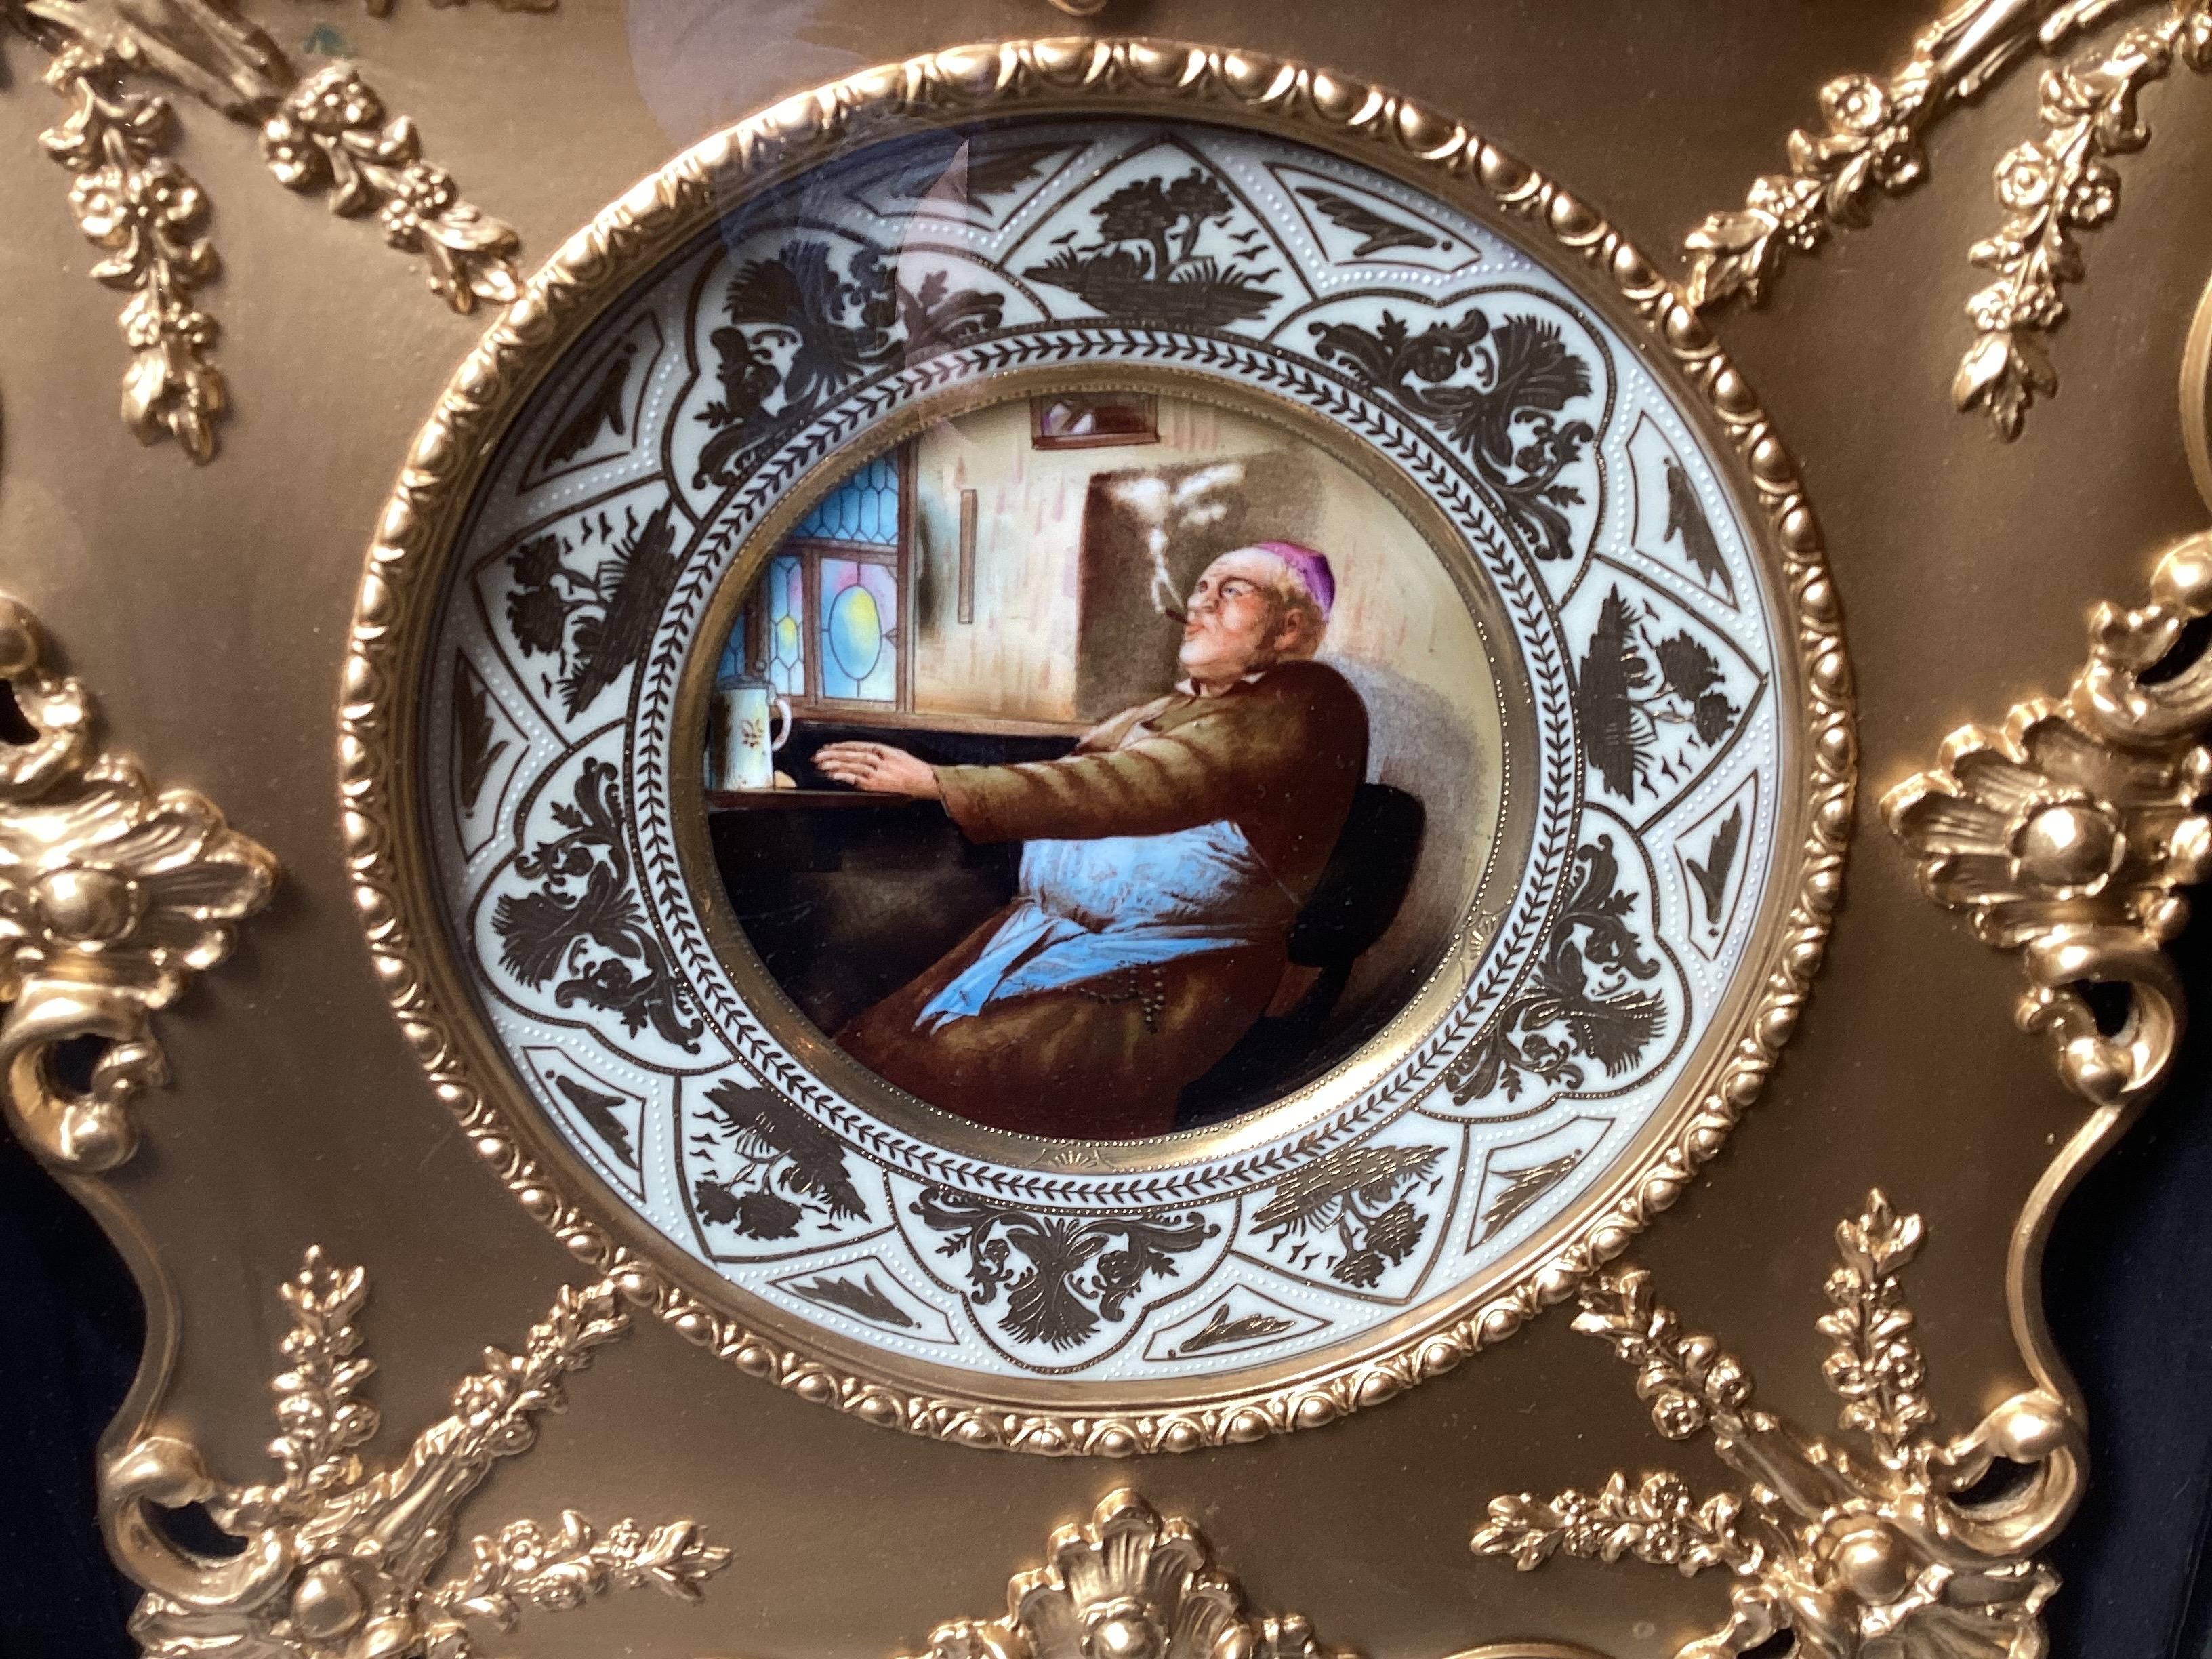 A hand painted porcelain cabinet plate with elaborate hand decorated raised gilt border, the central figure of a bishop.  The porcelain is 19th Century German or Austrian, with a beautiful elaborate gilt wood frame then mounted in an ebonized wood